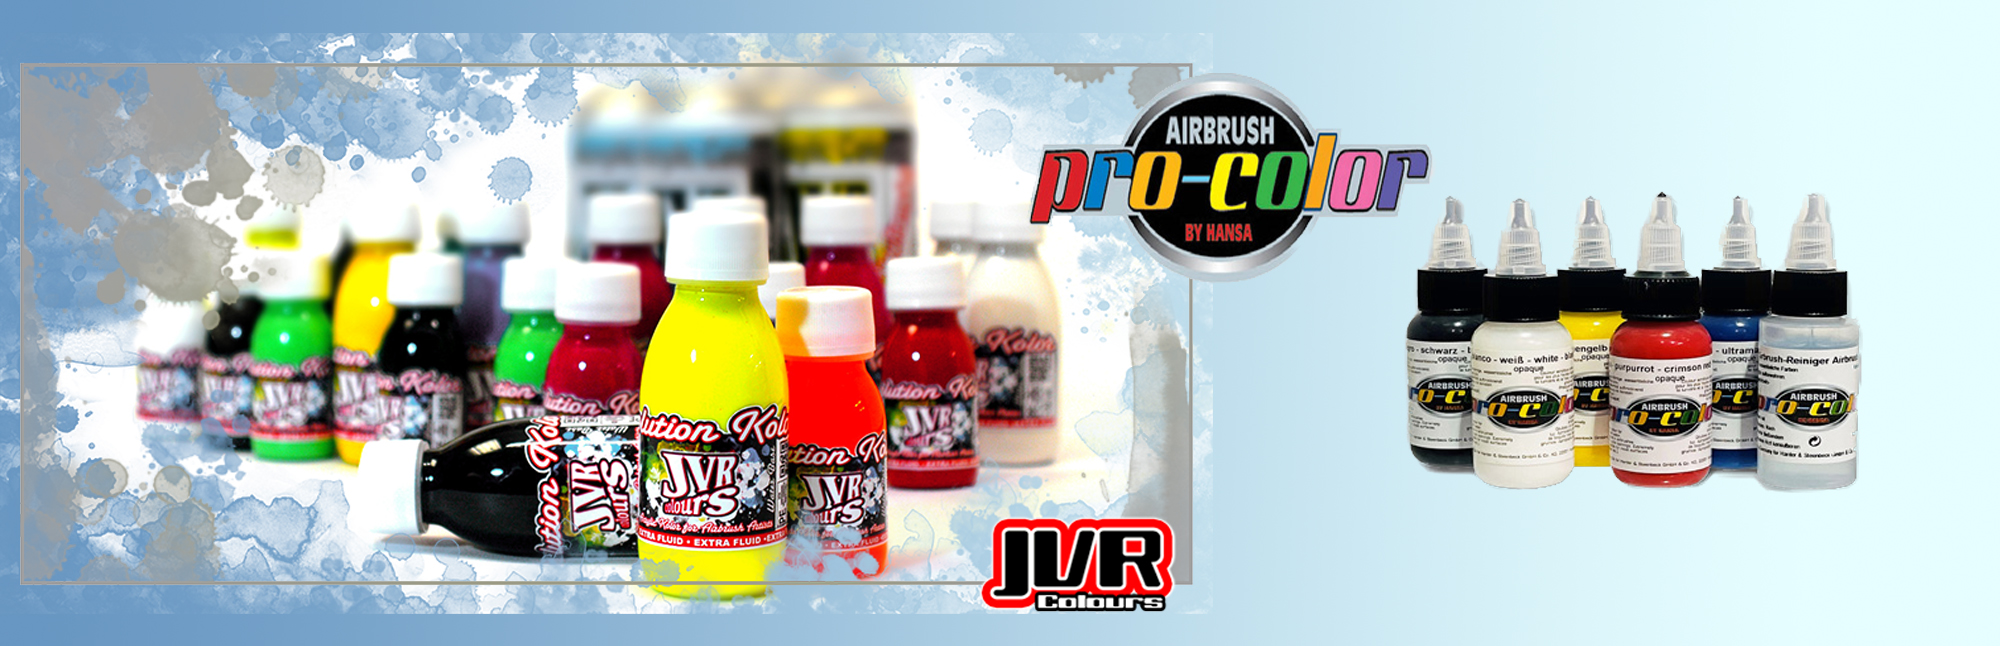 WHILE STOCKS LAST - JVR AND PRO-COLOR PAINTS